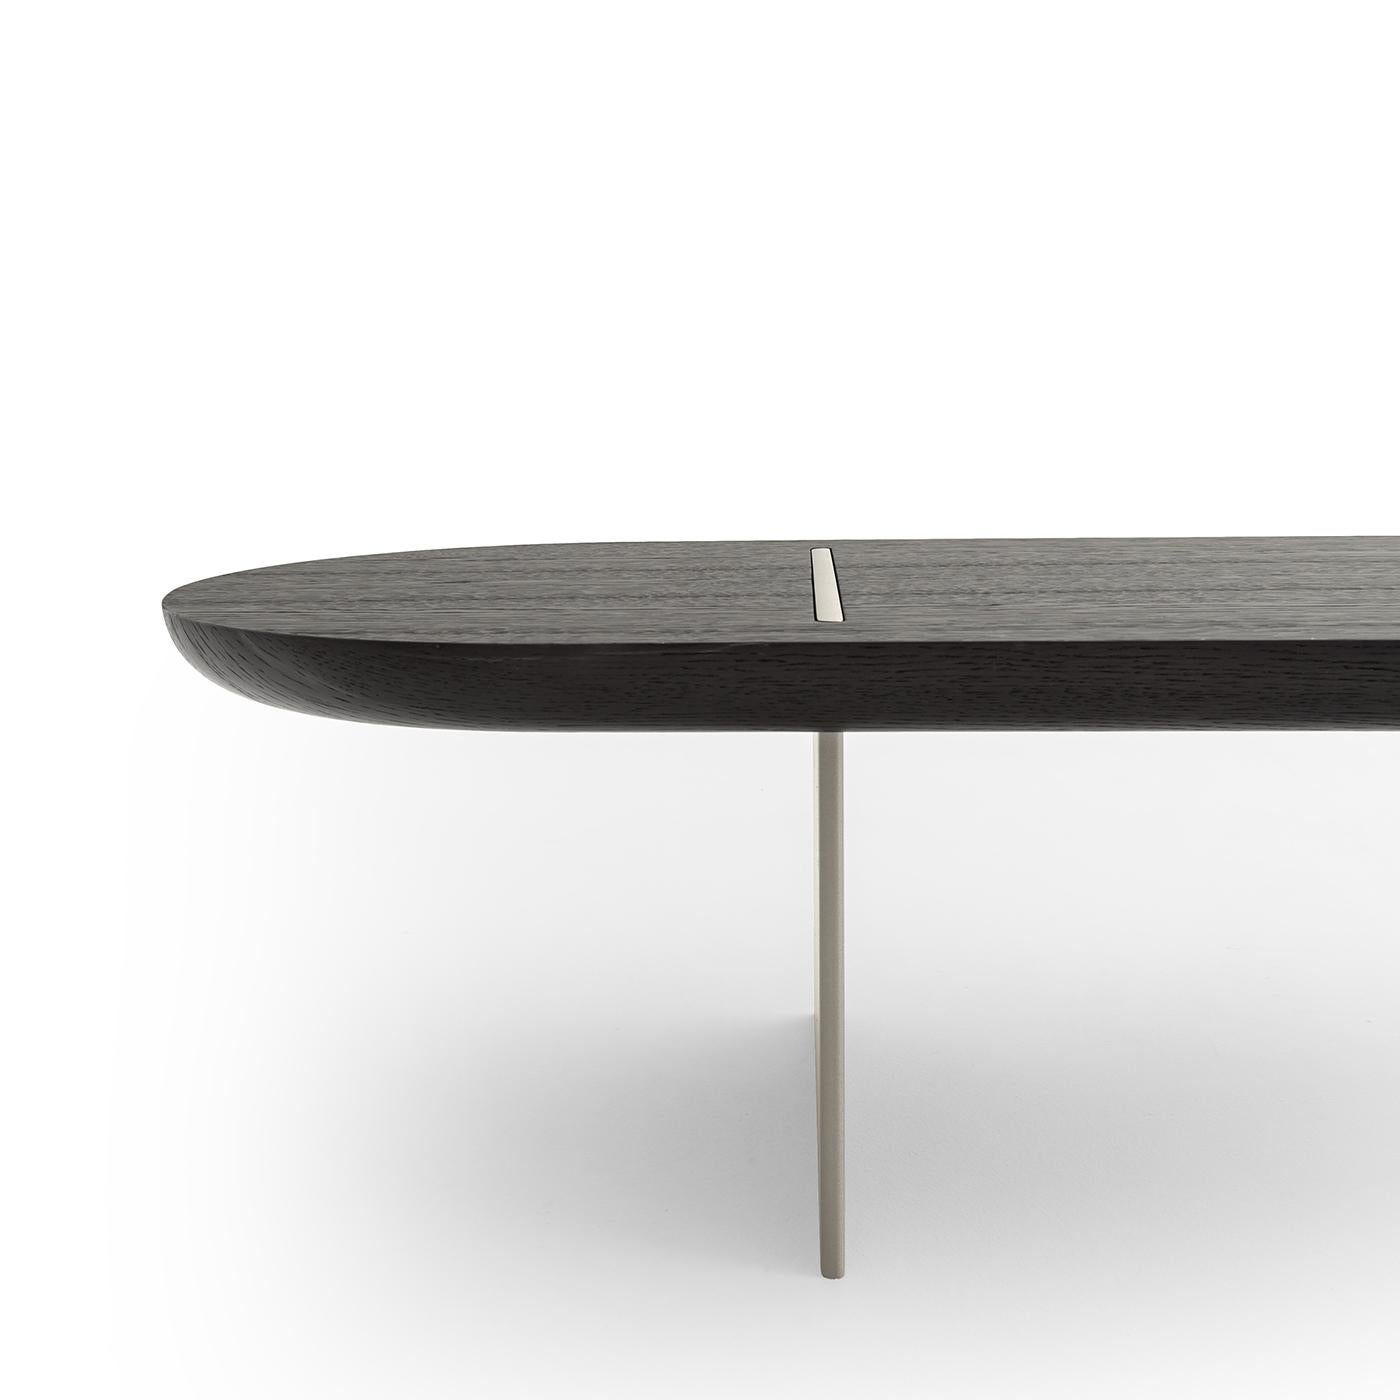 Poetically inspired by a typical French baguette in its elongated and rounded profile, this coffee table hints at reassuring everyday moments while never renouncing exclusivity. Orthogonal champagne-hued metal sheets varnished with epoxy powders